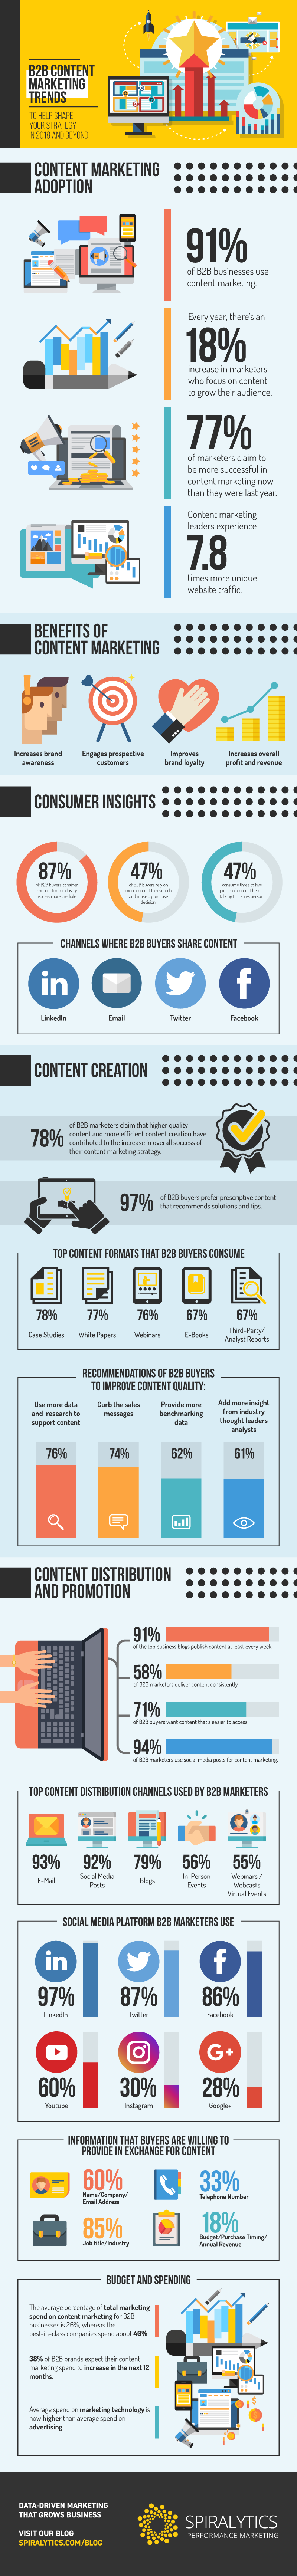 B2B content marketing trends infographic